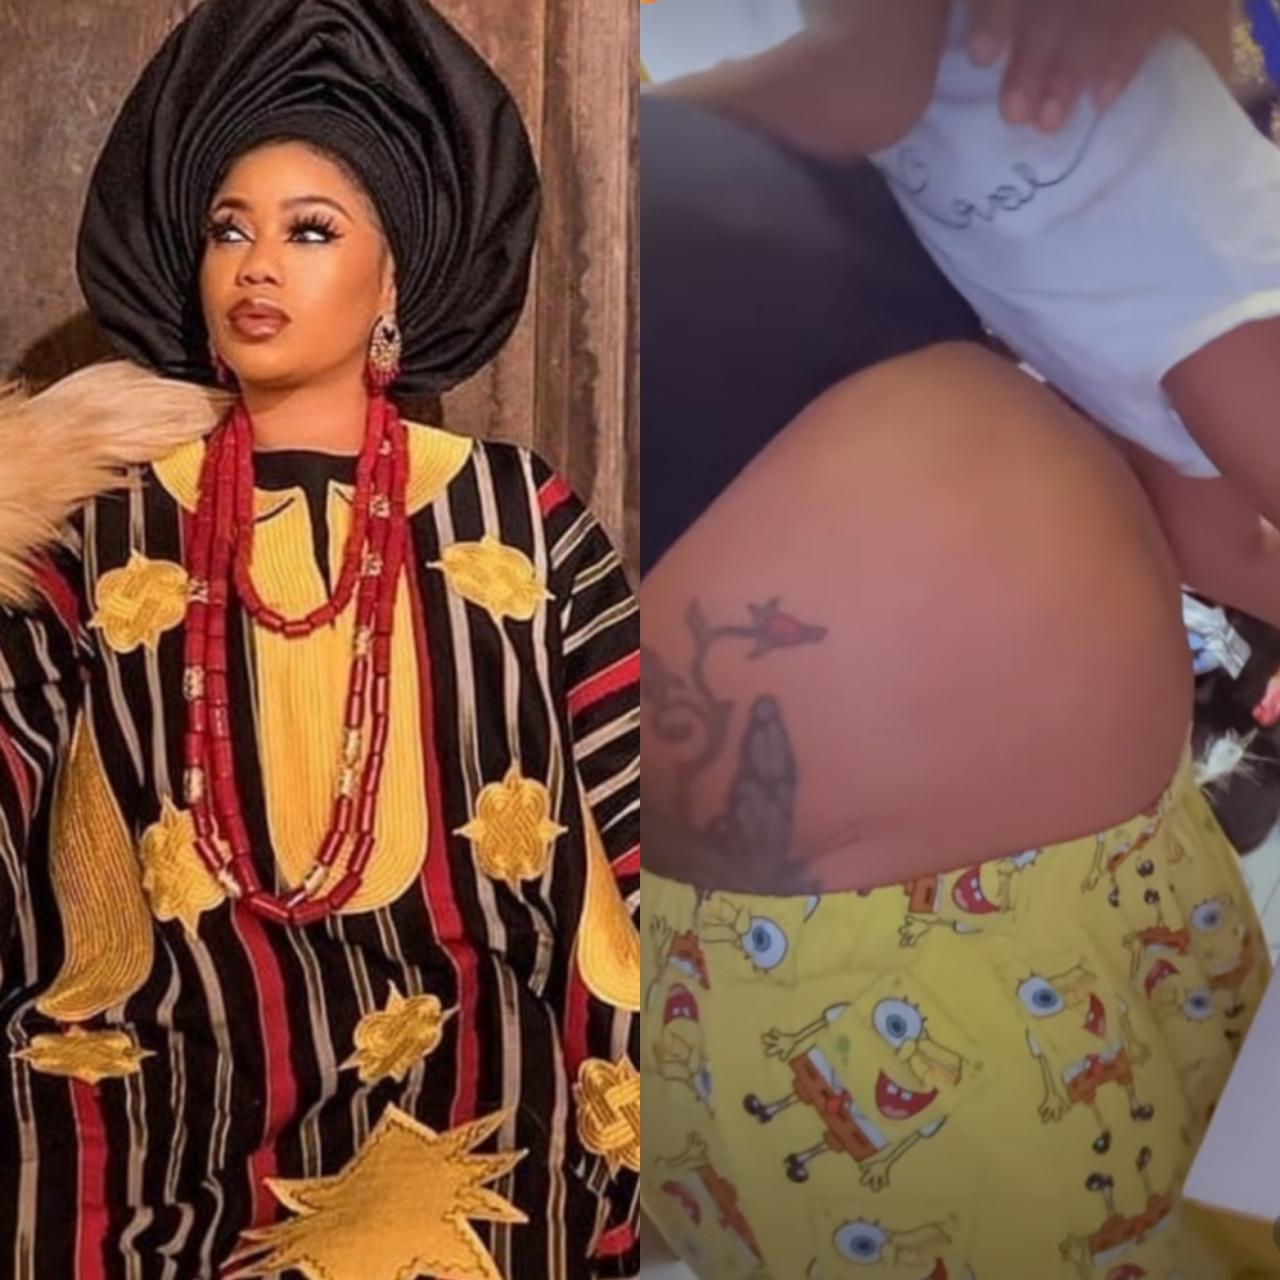 Toyin Lawani reveals she recently suffered a miscarriage as she details her health woes (video)